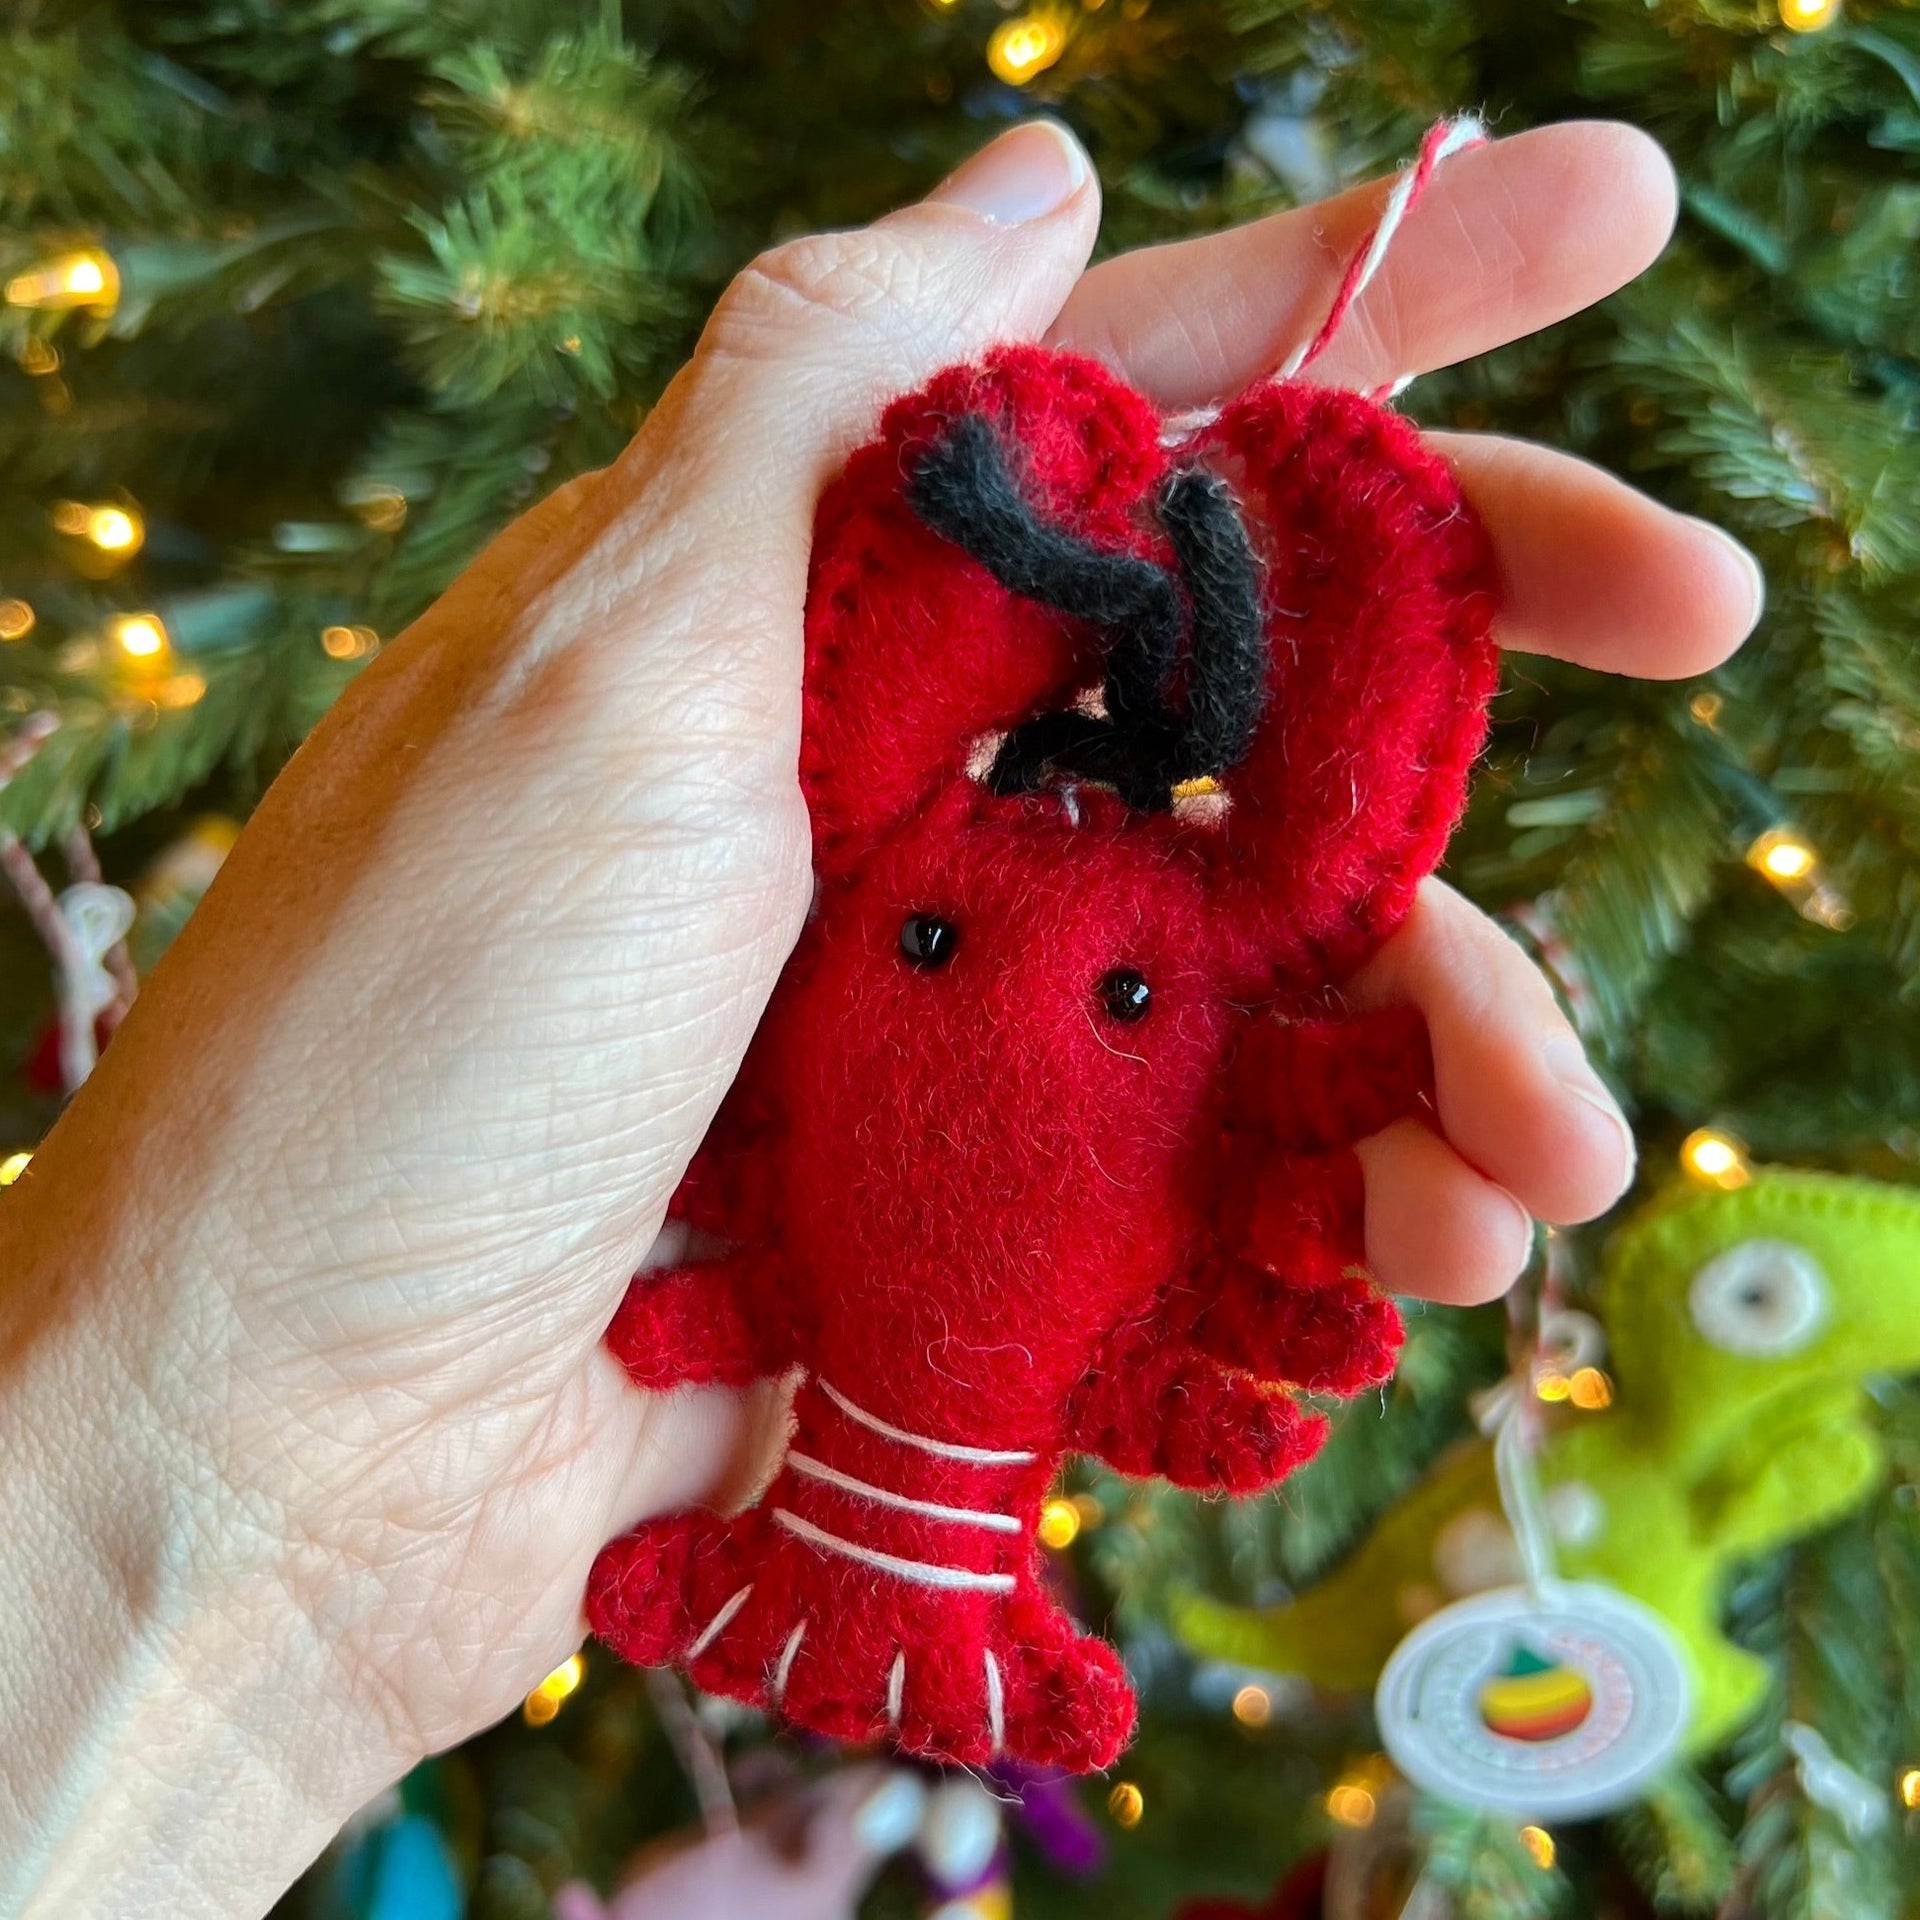 felt lobster ornament being held in front of a Christmas tree